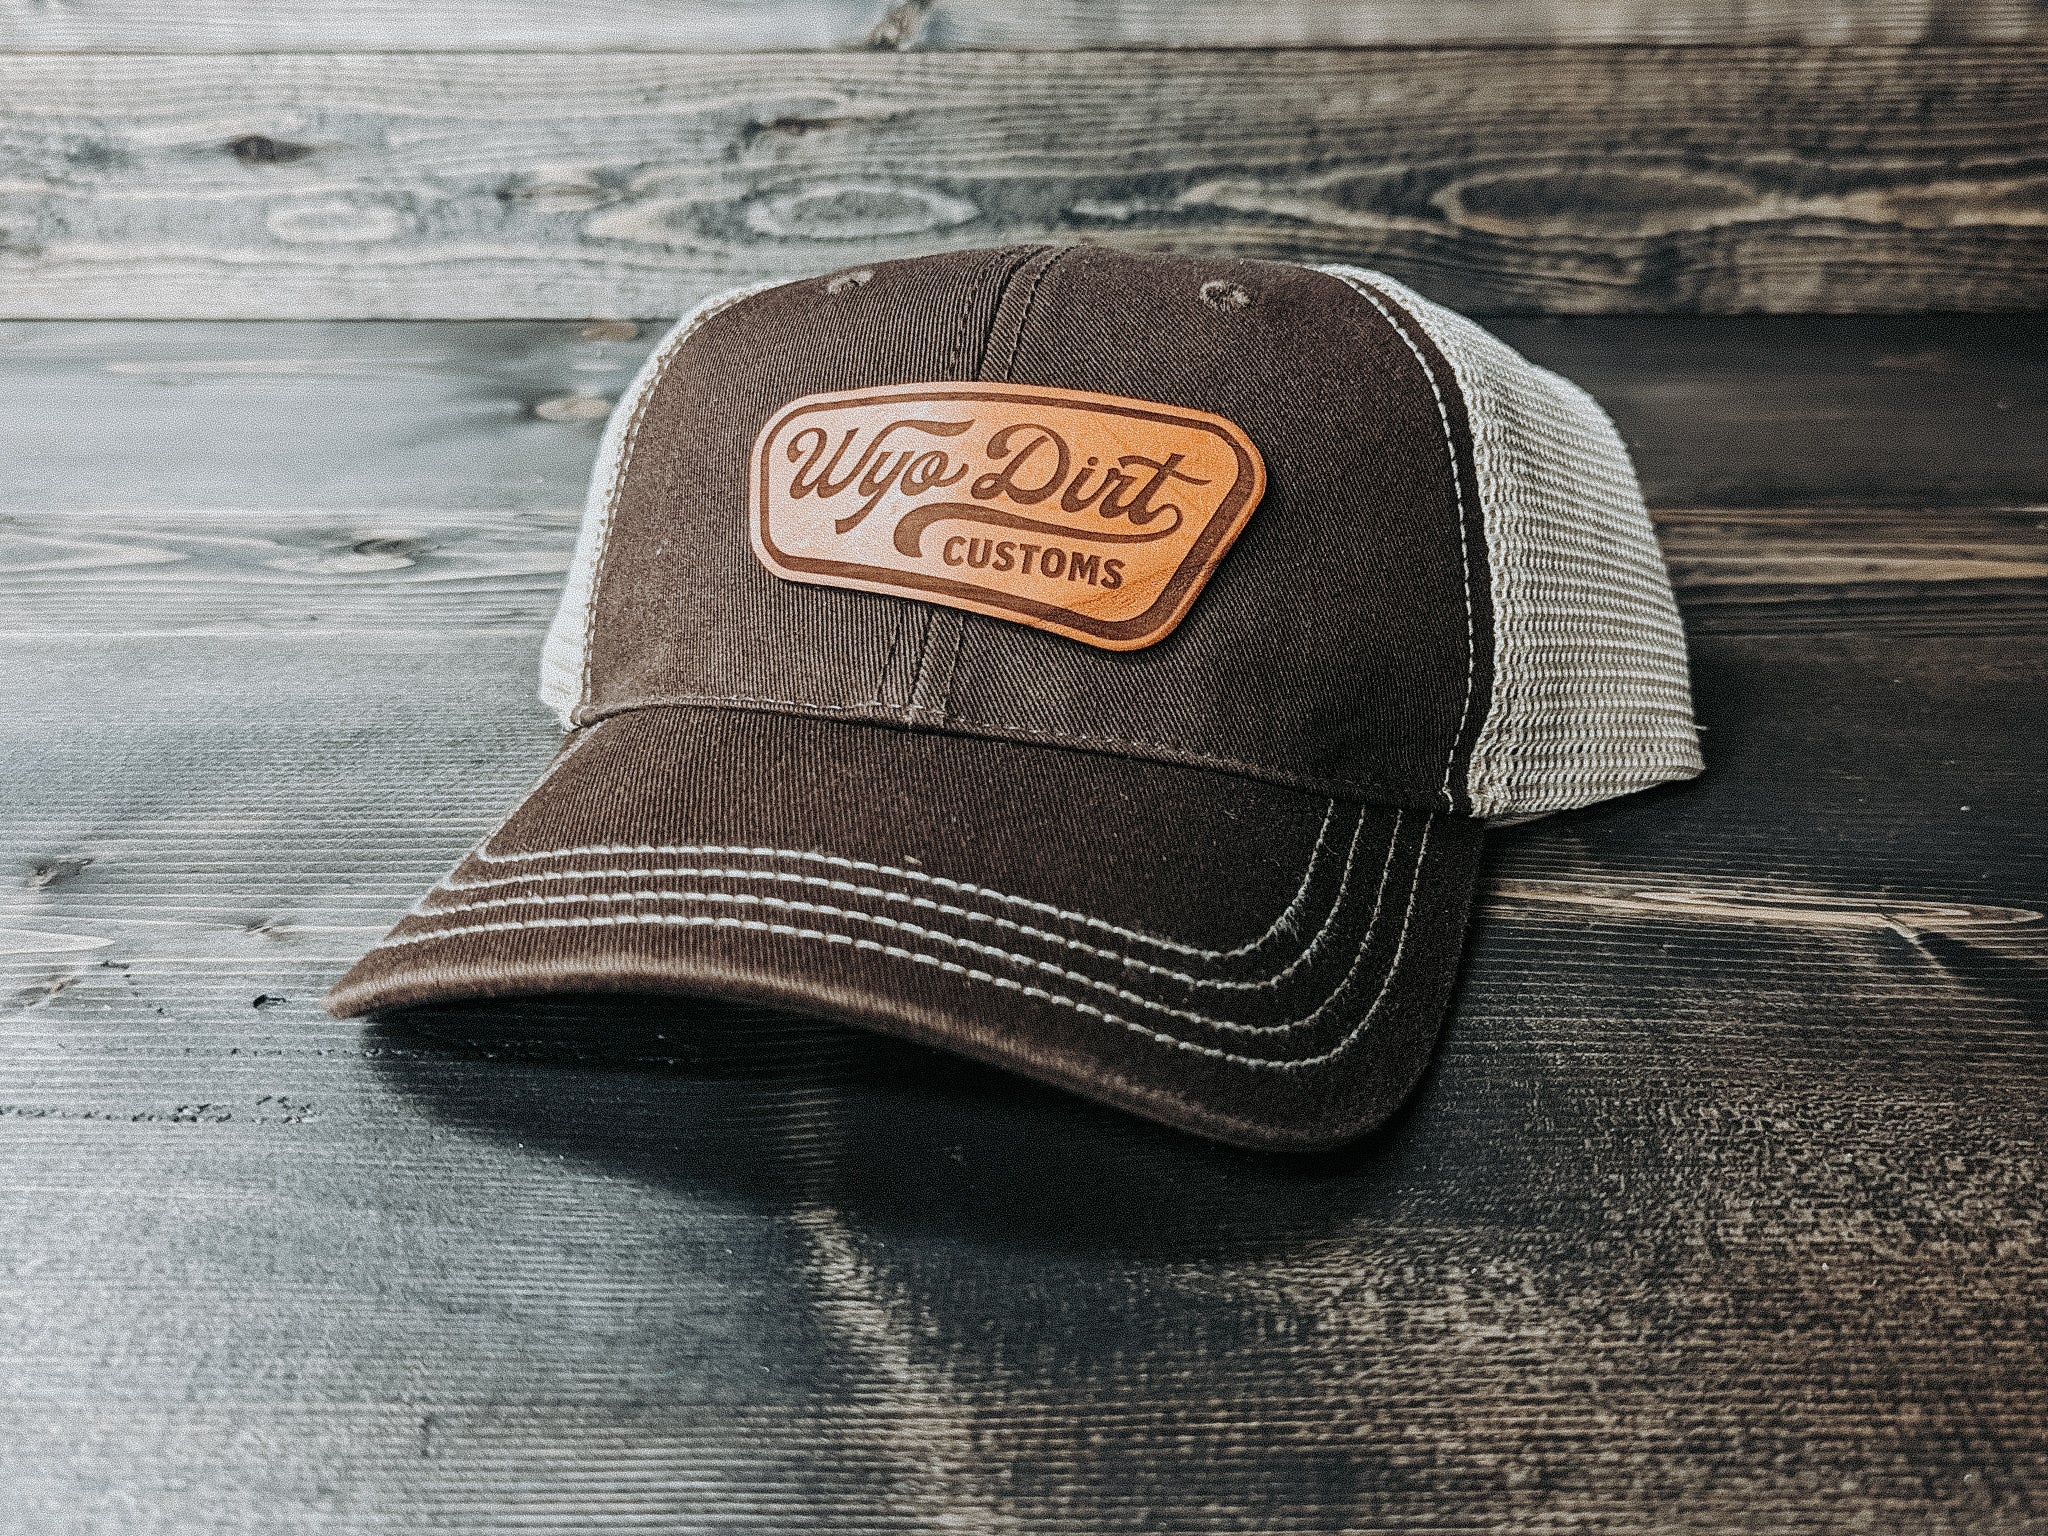 American Flag: Leather Patch Trucker Hat - Wyo Dirt Customs Loden/Black